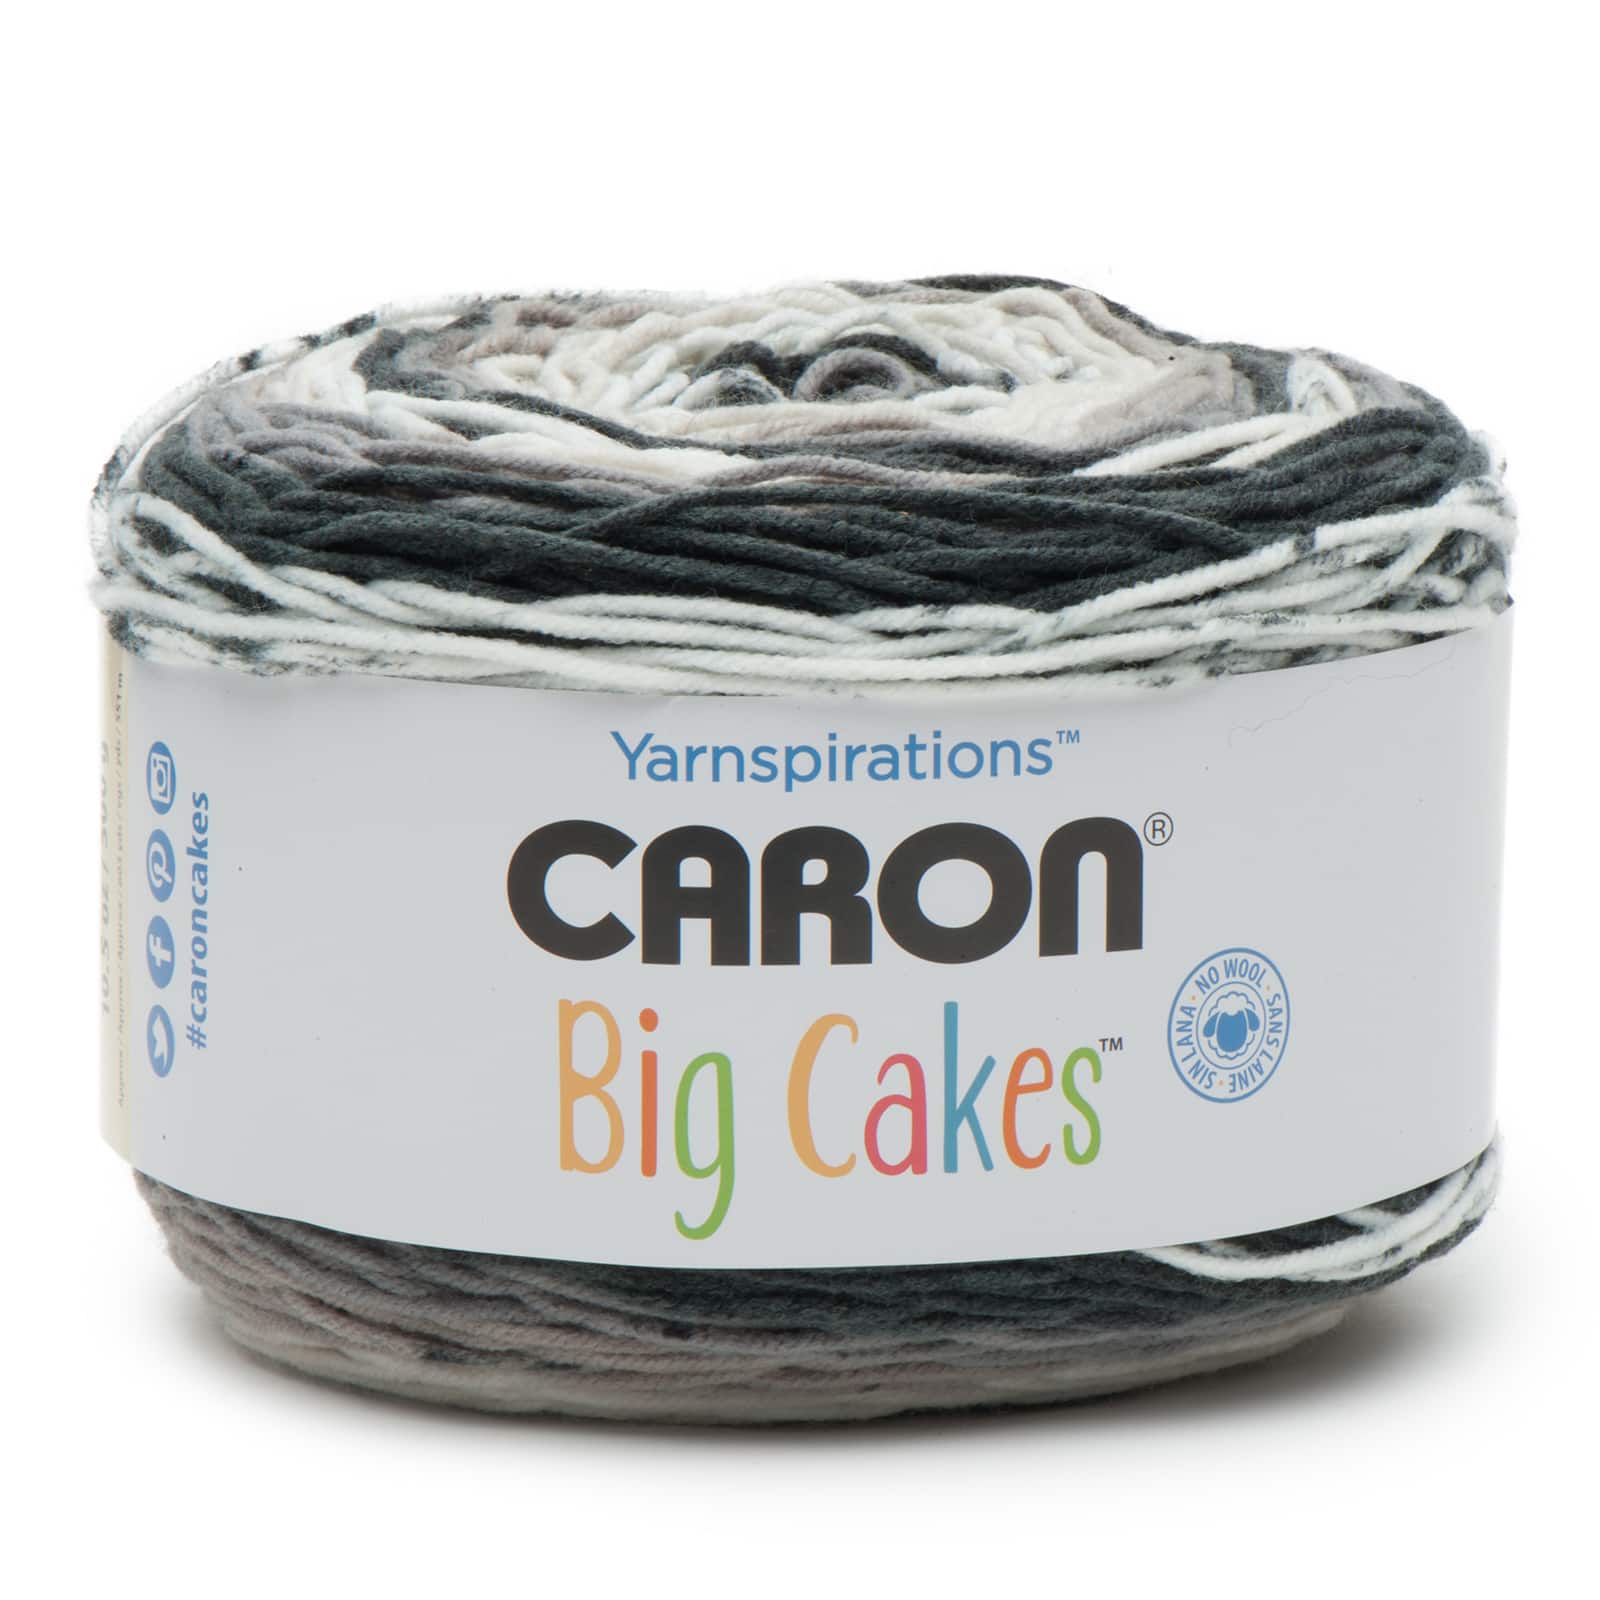 The blanket underneath is 3 cakes of 'Caron Big Cakes' which is